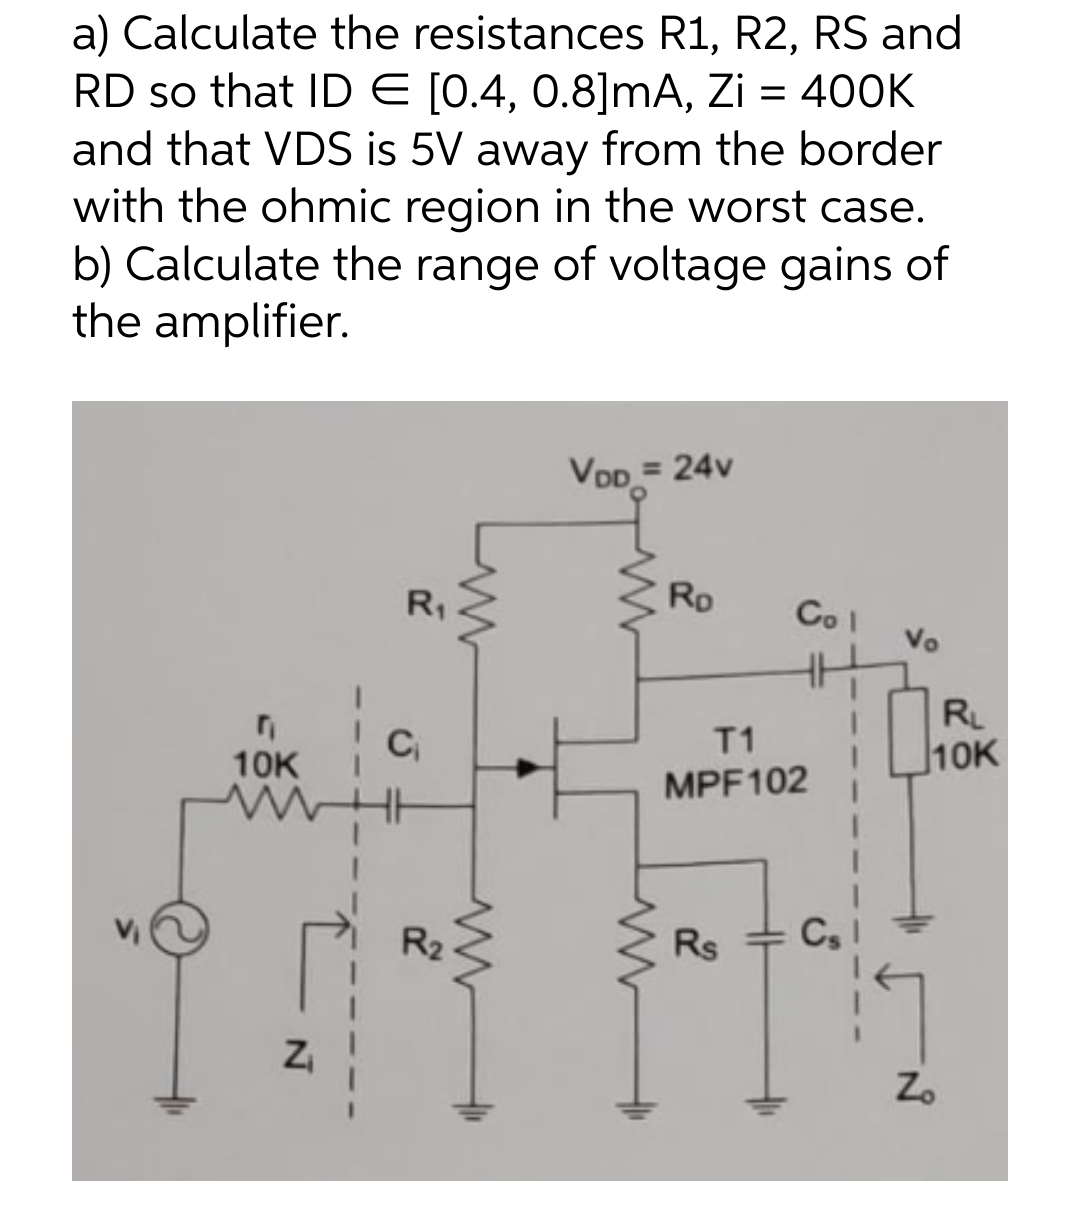 a) Calculate the resistances R1, R2, RS and
RD so that ID € [0.4, 0.8]mA, Zi = 400K
and that VDS is 5V away from the border
with the ohmic region in the worst case.
b) Calculate the range of voltage gains of
the amplifier.
10K
N
R₁
C₁
R₂
www
www
VDD = 24v
www
www
Ro
T1
MPF102
2
Col
Rs
Vo
Cs
79
RL
10K
17
Zo